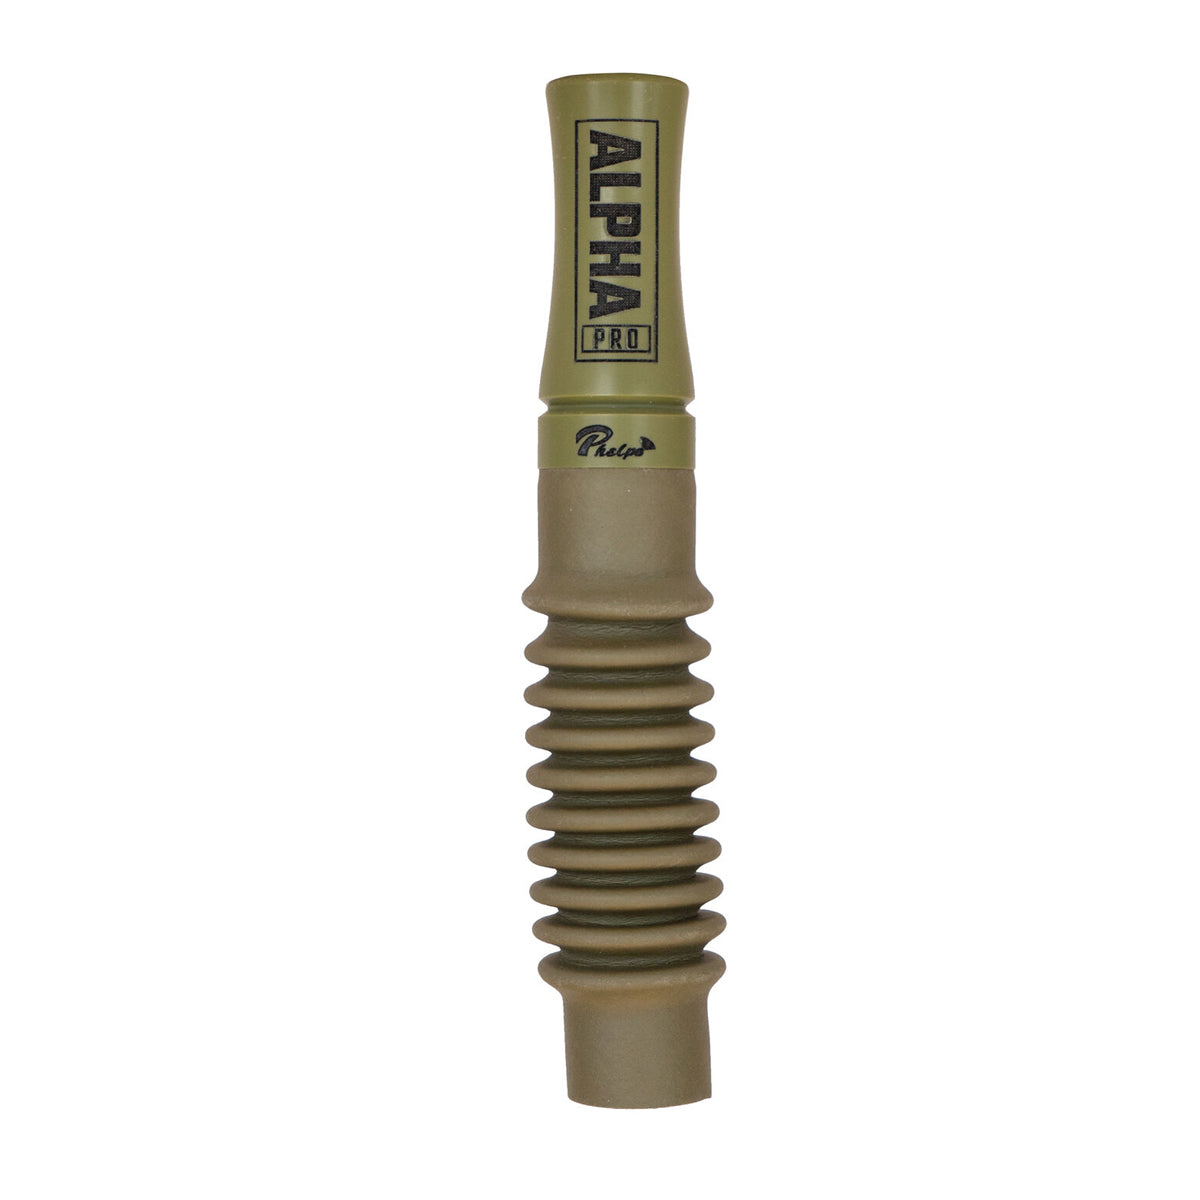 Phelps Alpha Pro Grunt Call in  by GOHUNT | Phelps Game Calls - GOHUNT Shop